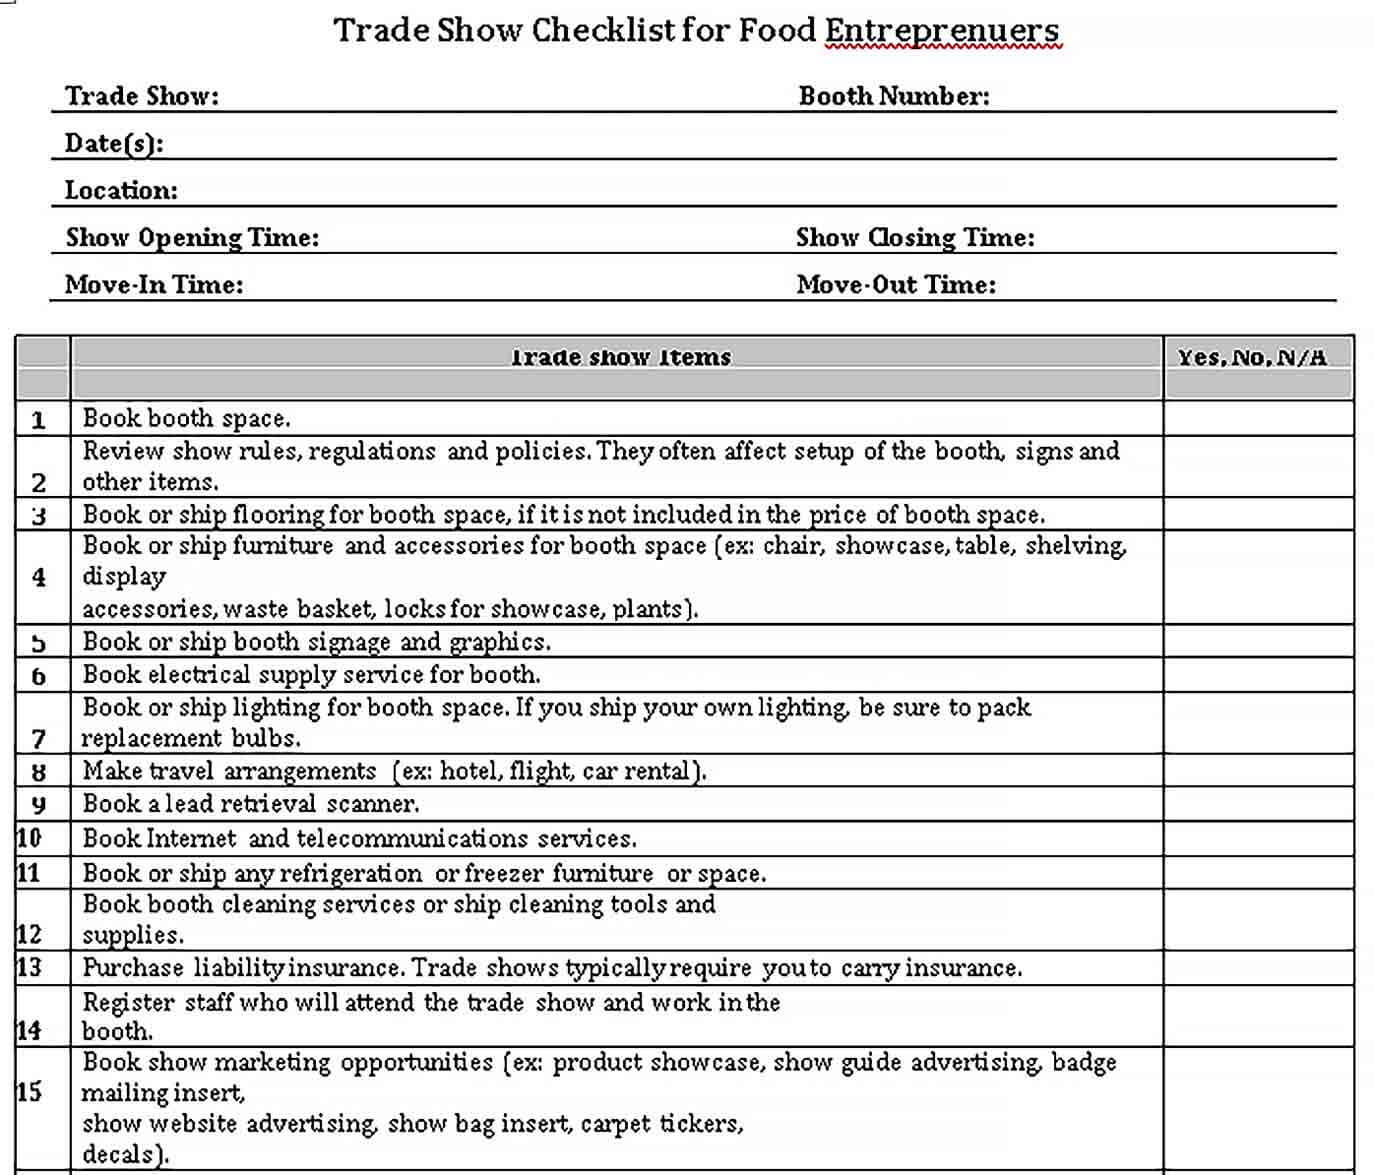 Sample Trade Show Checklist for Food Entreprenuers